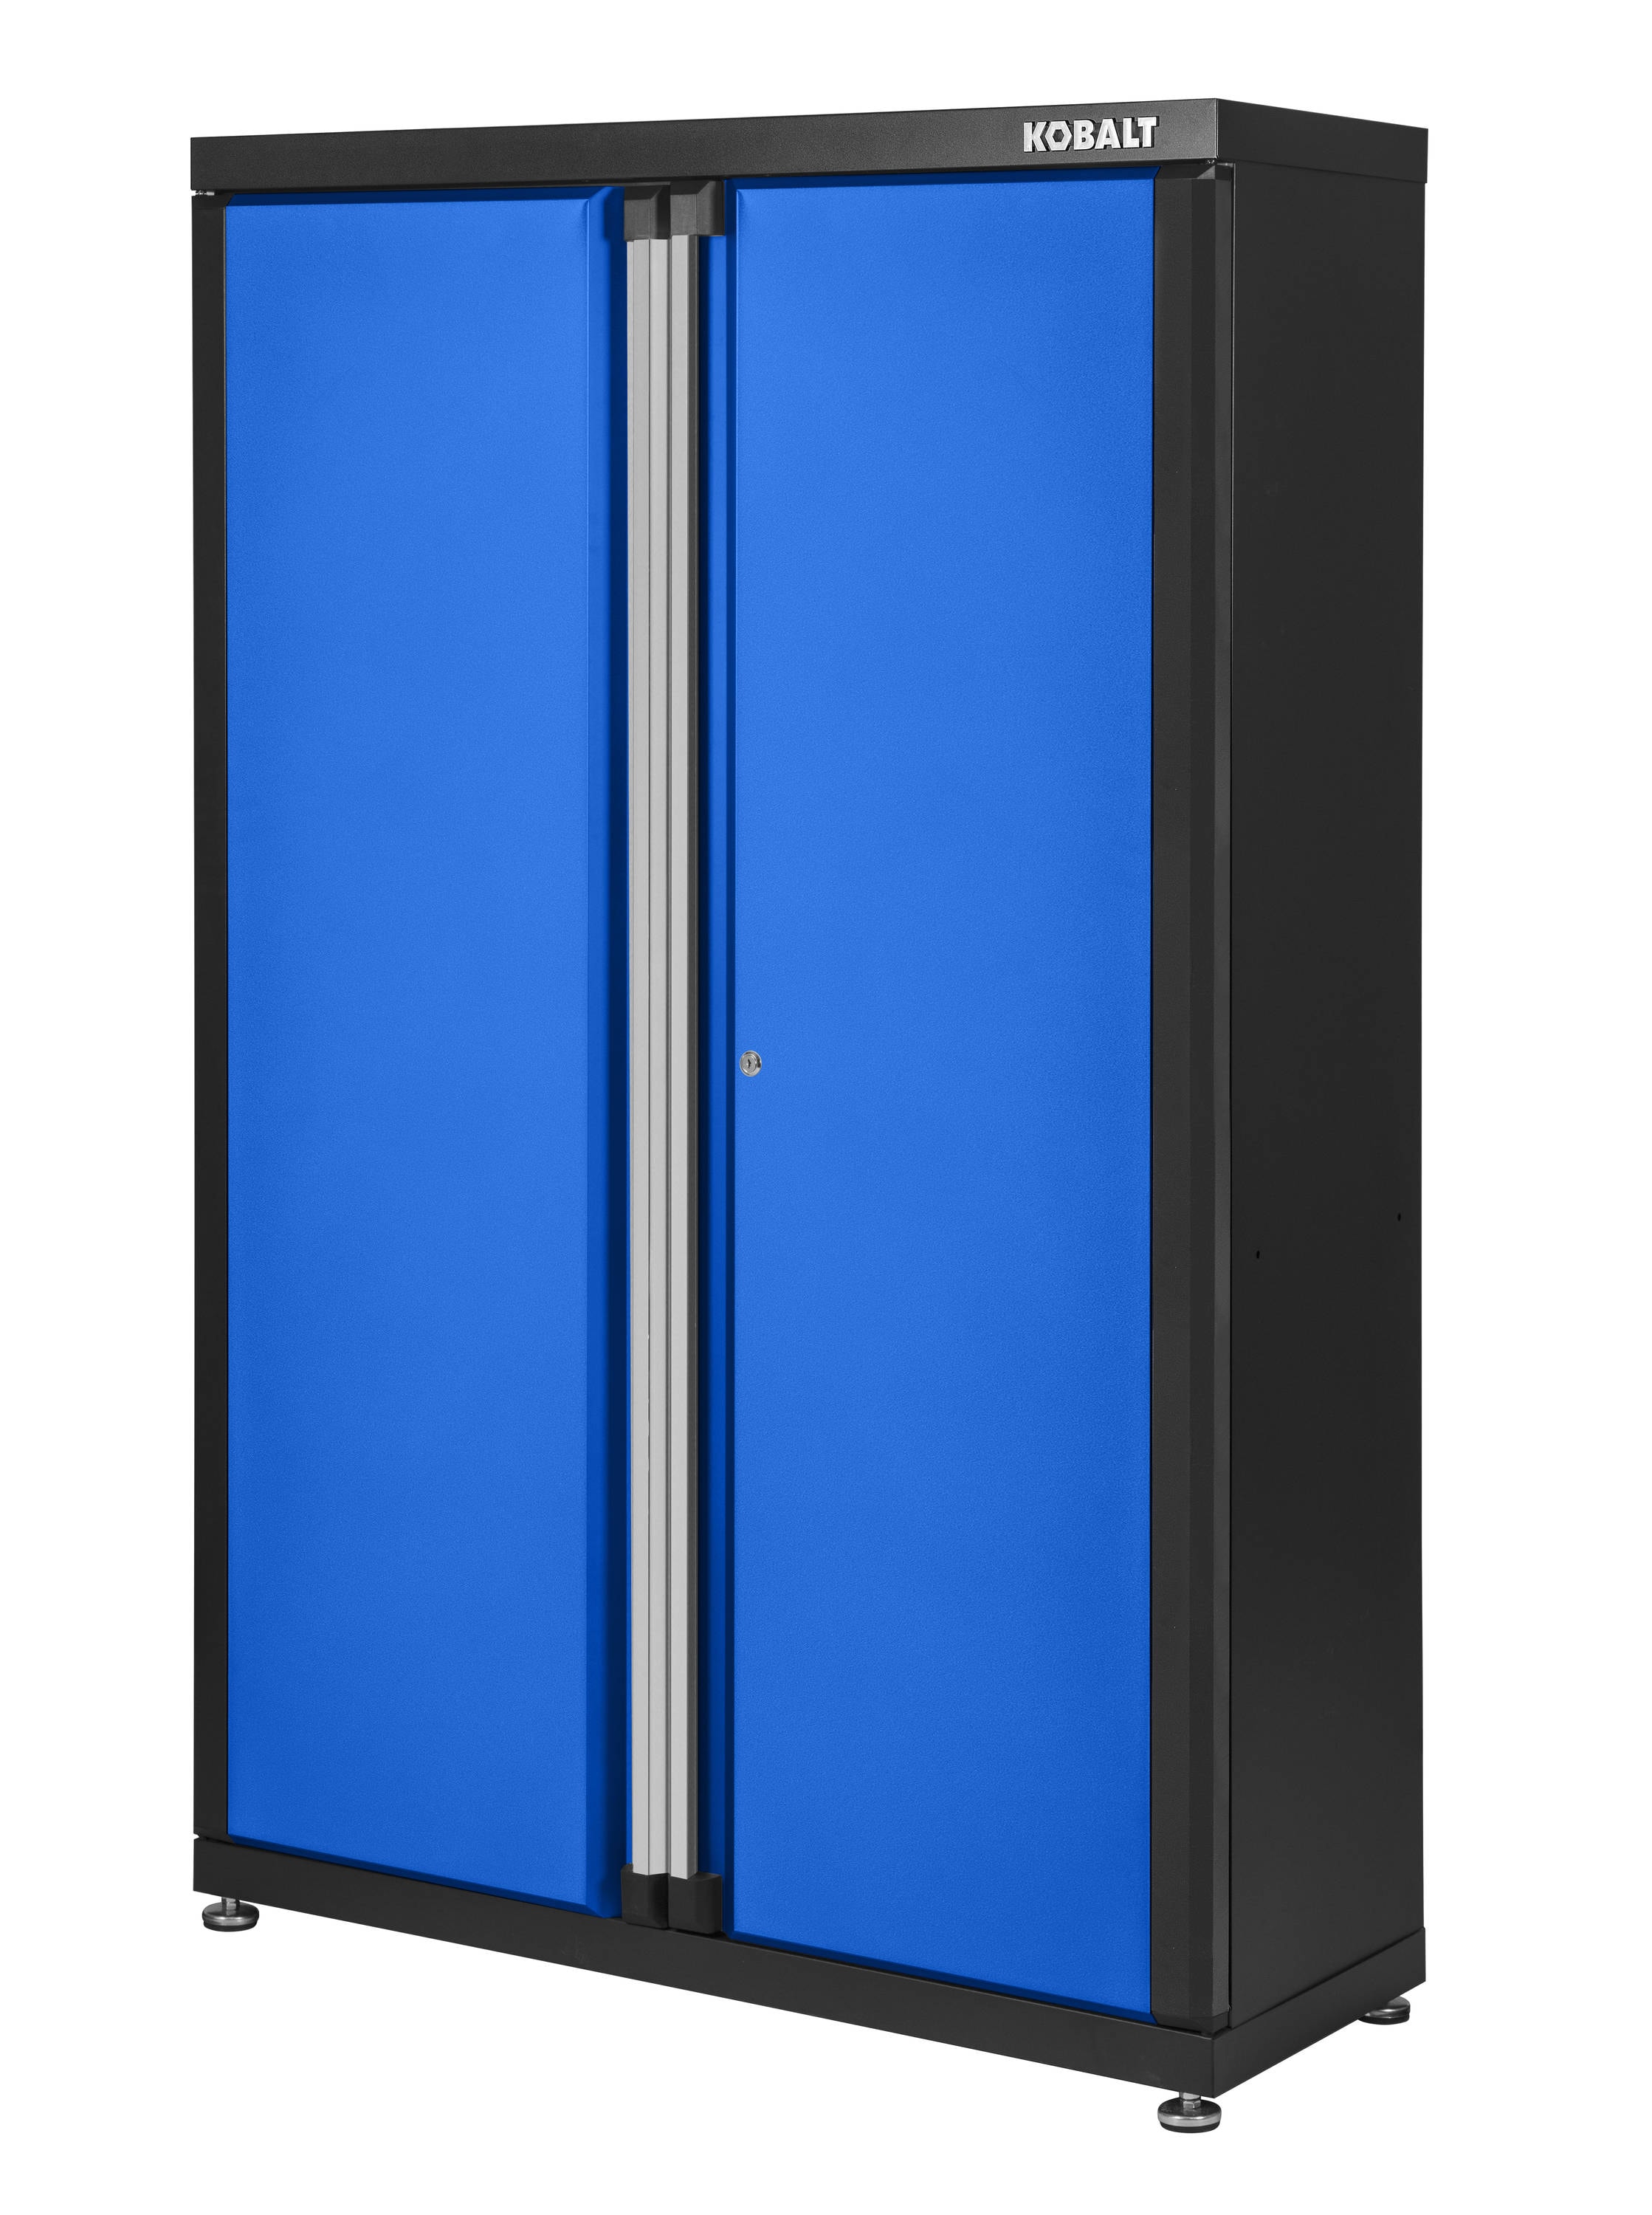 Kobalt Steel Freestanding Garage Cabinet In Blue 48 W X 72 H 18 5 D The Cabinets Department At Lowes Com